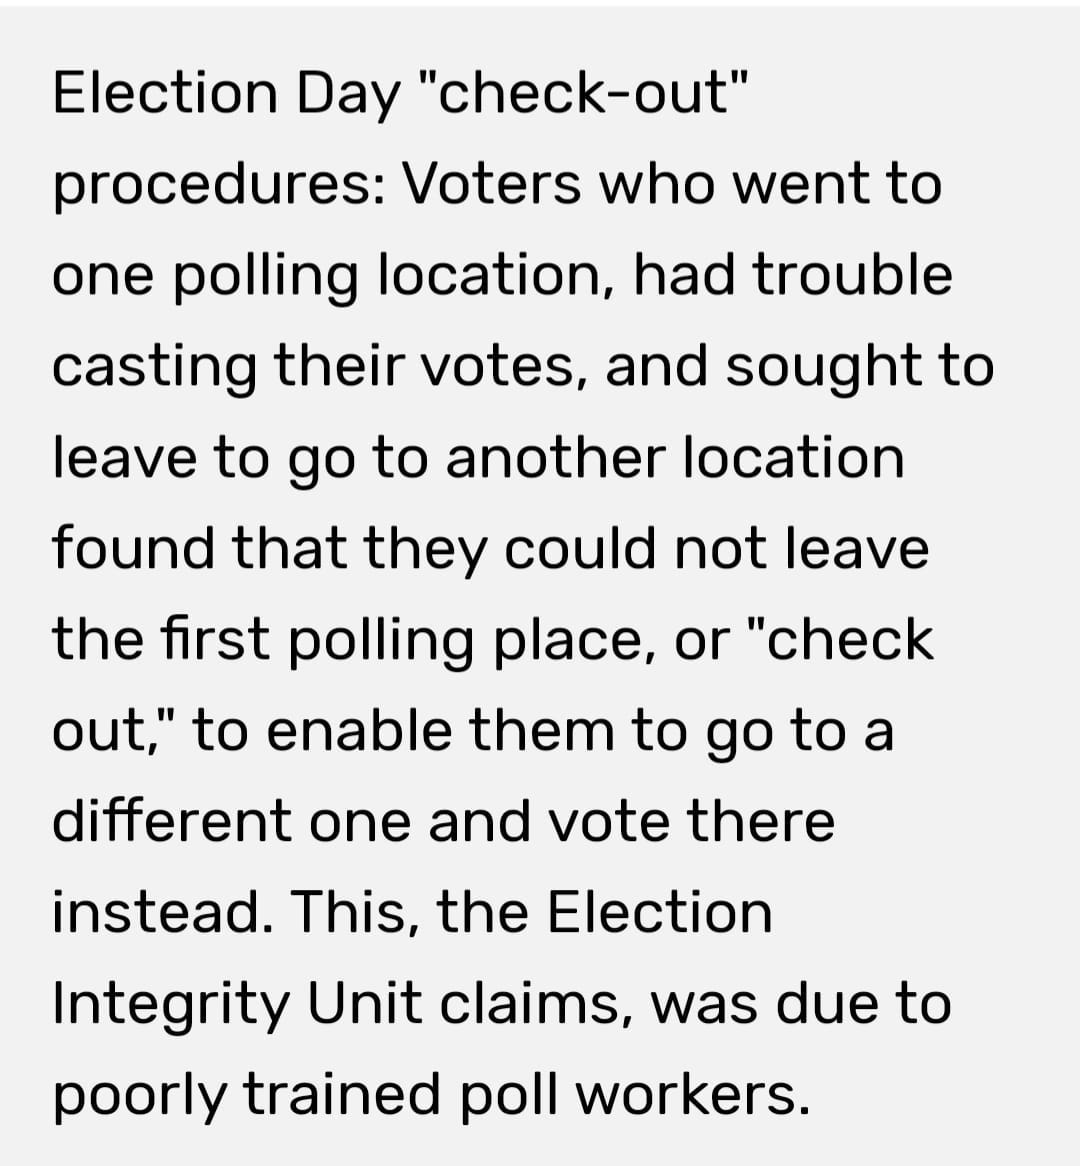 May be an image of text that says 'Election Day "check-out" procedures: Voters who went to one polling location, had trouble casting their votes, and sought to leave to go to another location found that they could not leave the first polling place, or "check out," to enable them to go to a different one and vote there instead. This, the Election Integrity Unit claims, was due to poorly trained poll workers.'